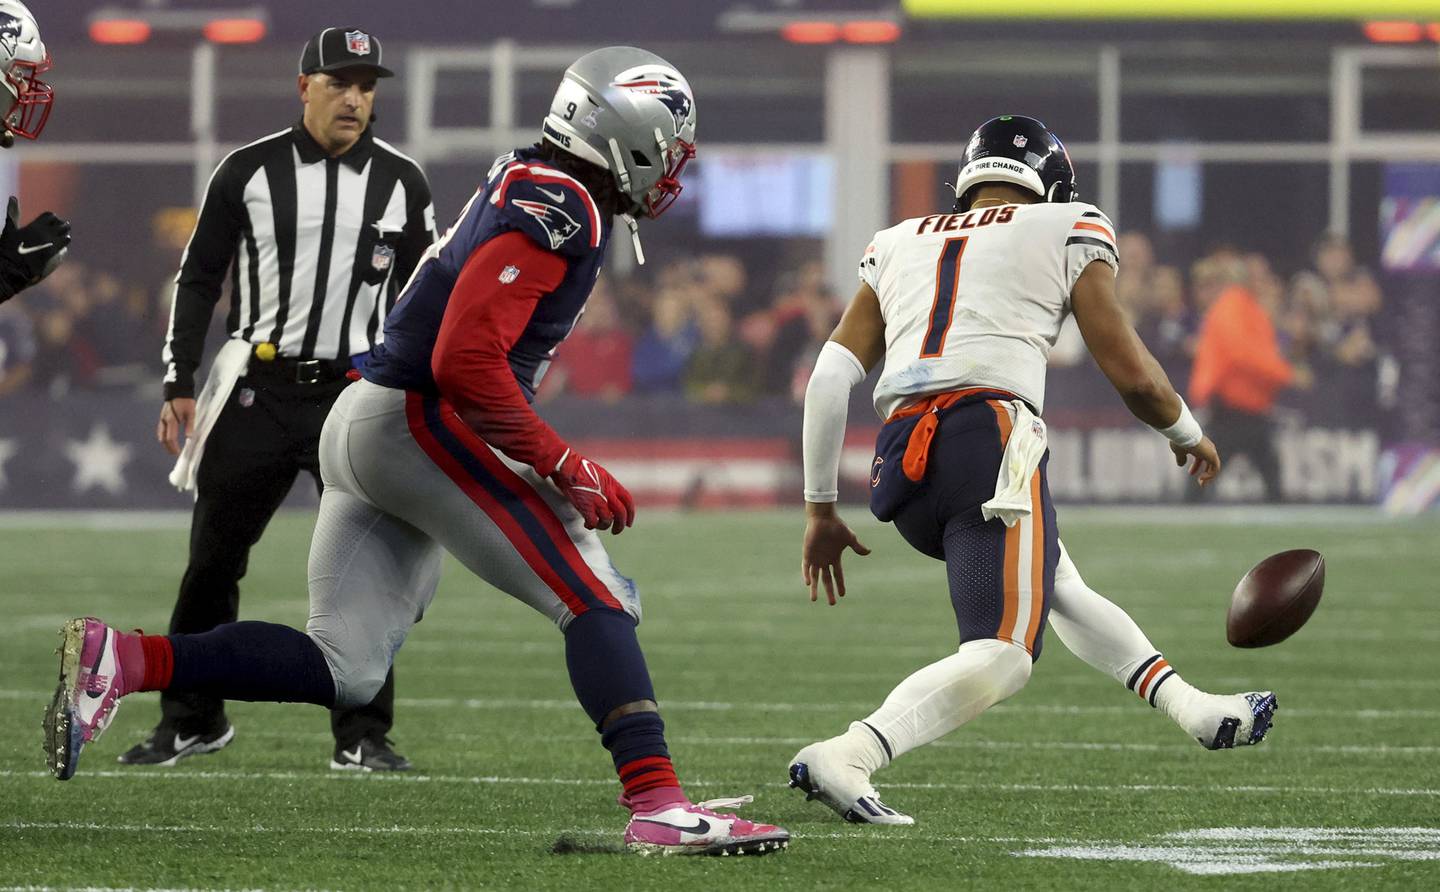 Bears quarterback Justin Fields fumbles the ball in the second quarter against the Patriots on Monday, Oct. 24, 2022, at Gillette Stadium in Foxborough, Mass.